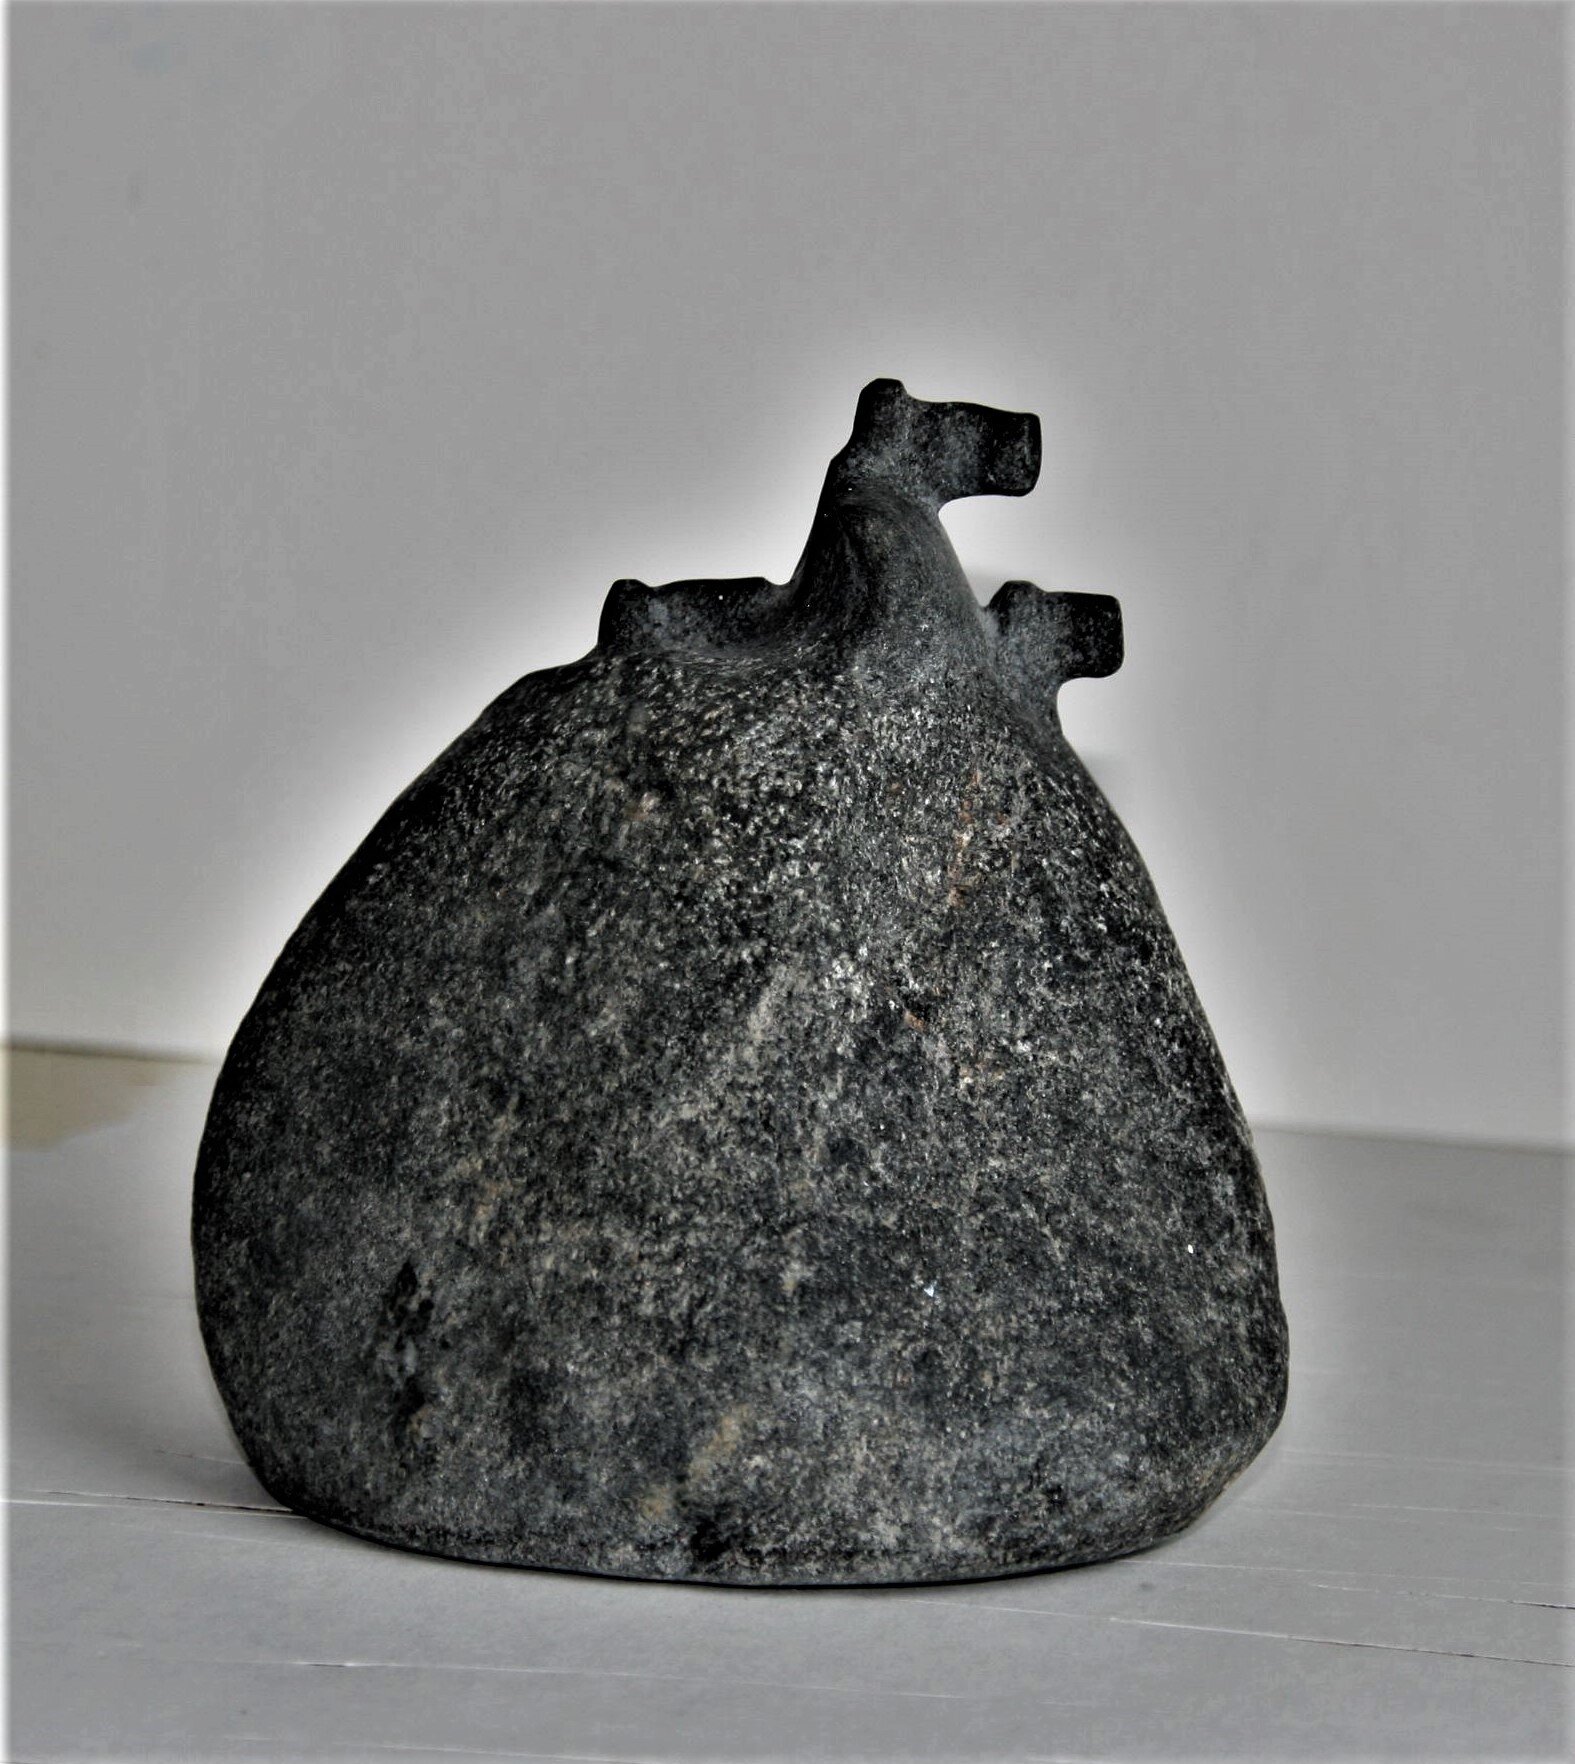    Aid,  13 x 11 x 8cm, Frobisher’s gold ore, 2011.  